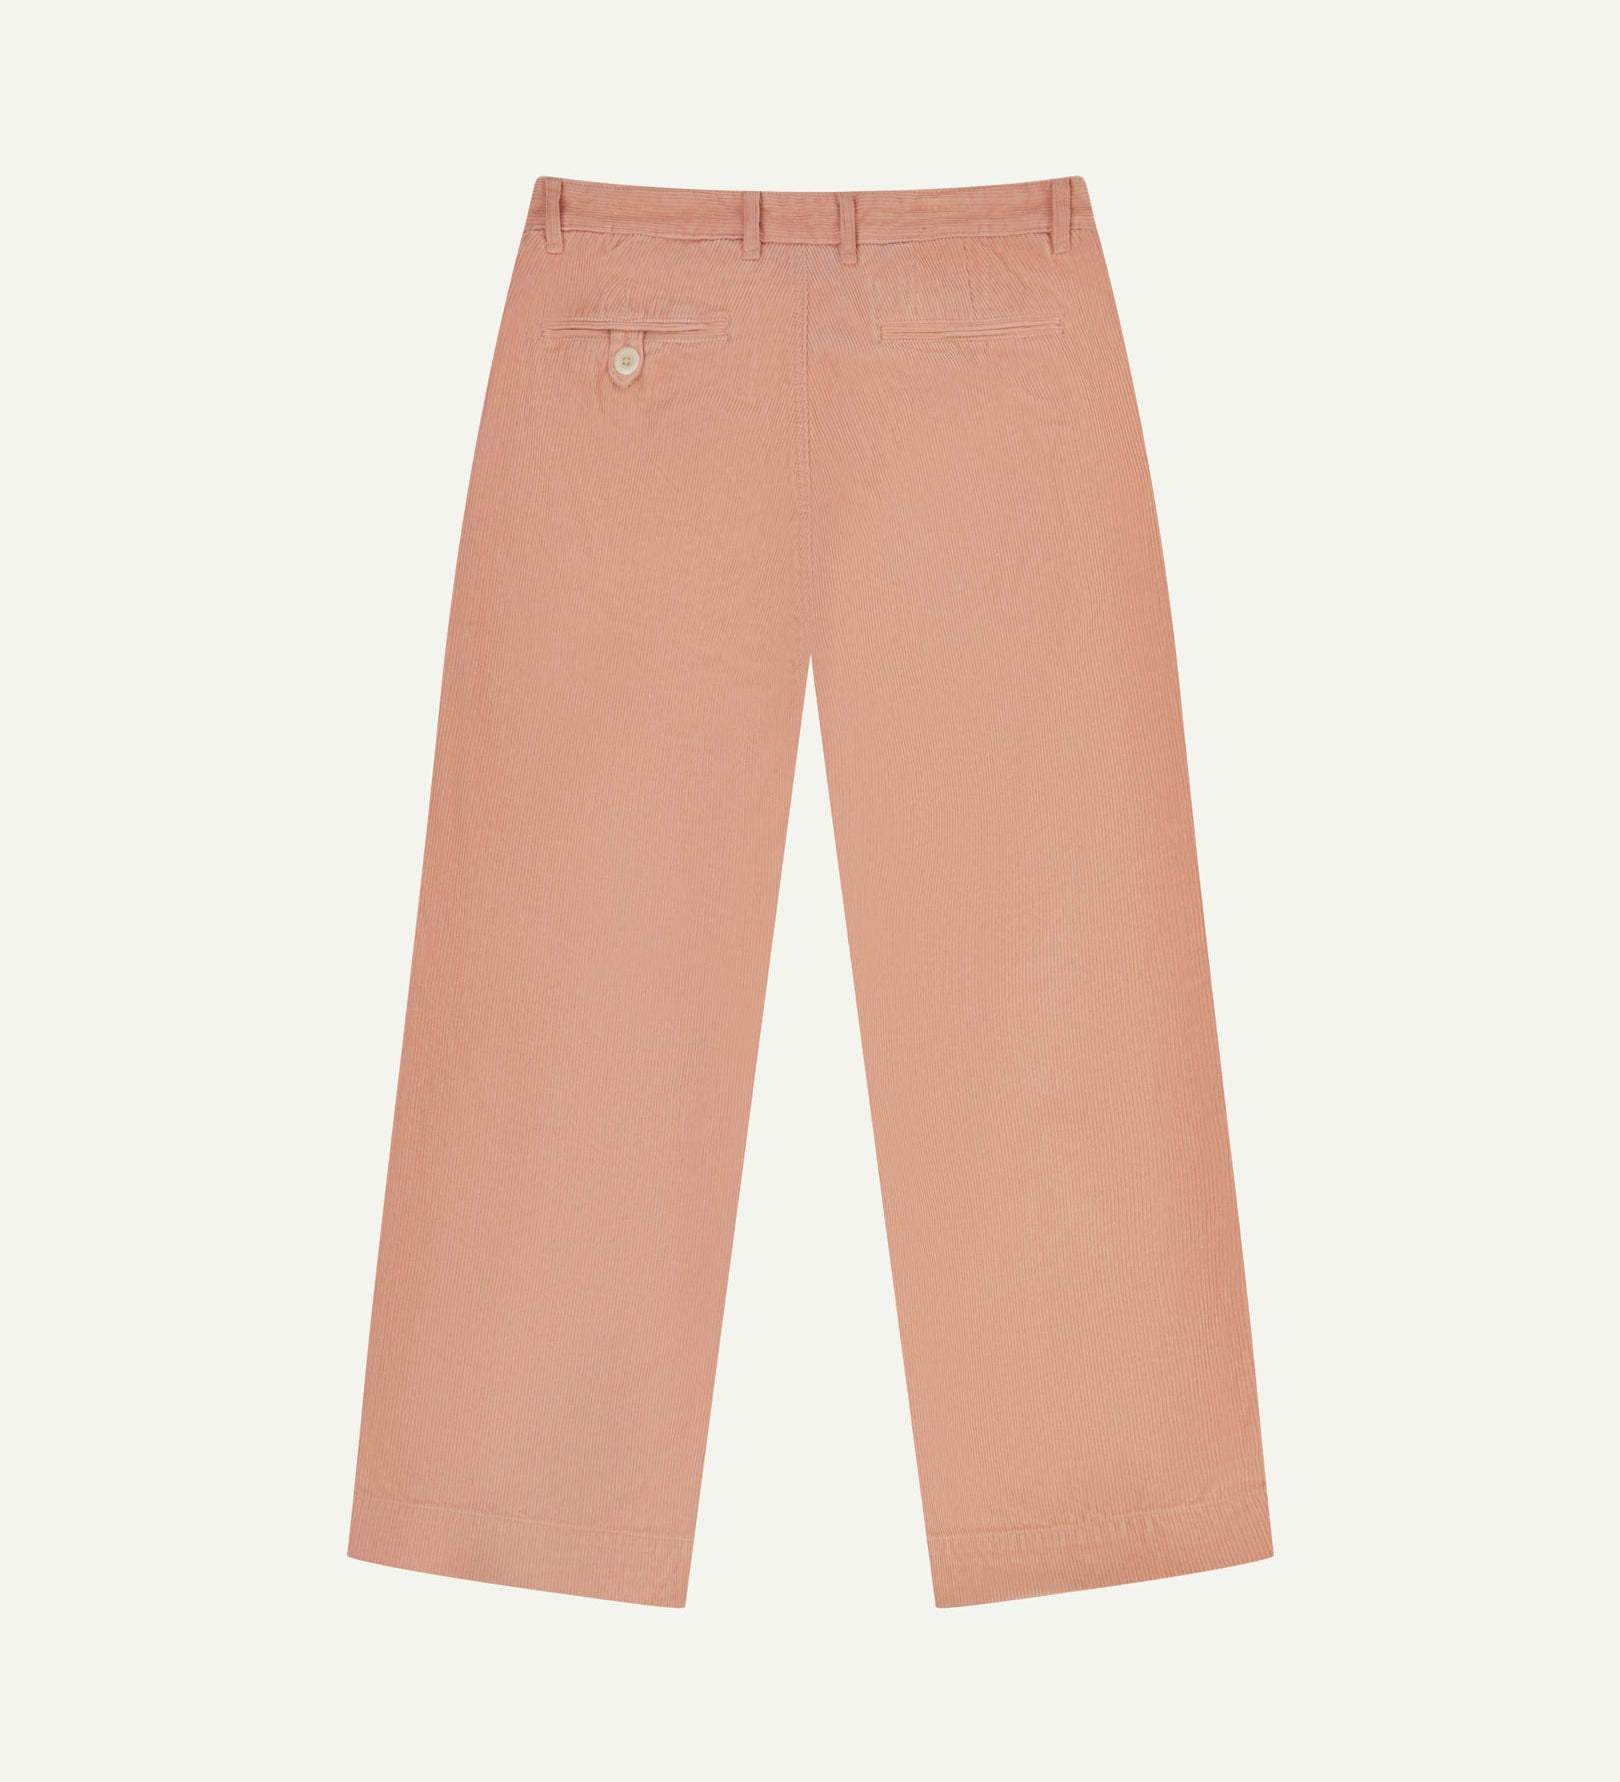 Back flat view of Uskees 5018 cord boat pants in dusty pink showing belt loops, back pockets and simple, vintage silhouette.